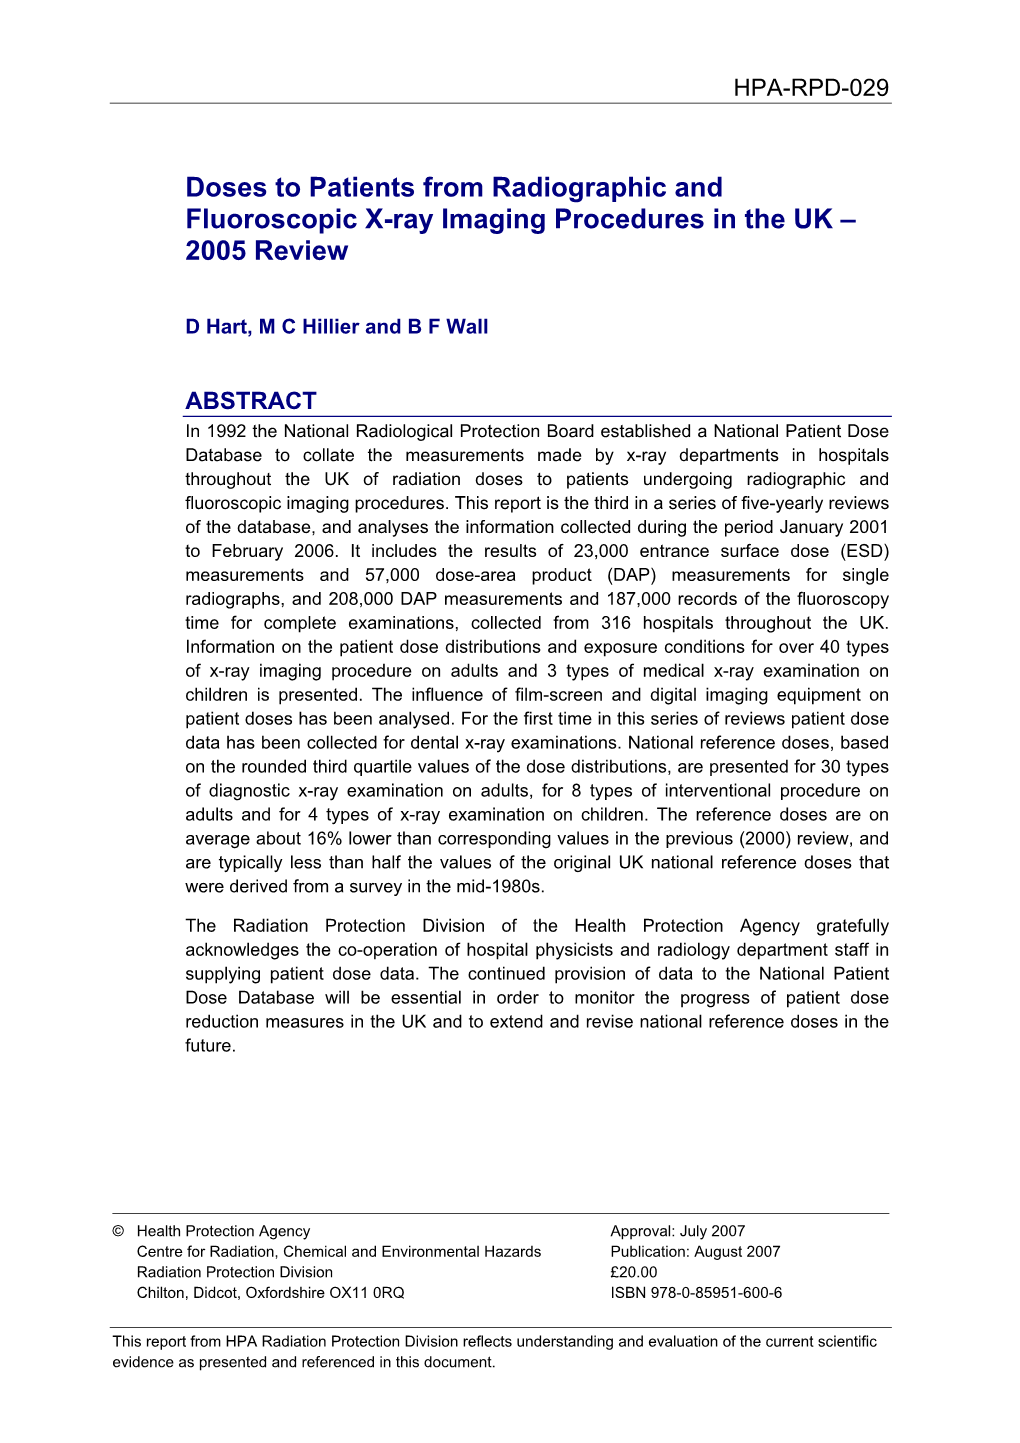 Doses to Patients from Radiographic and Fluoroscopic X-Ray Imaging Procedures in the UK – 2005 Review